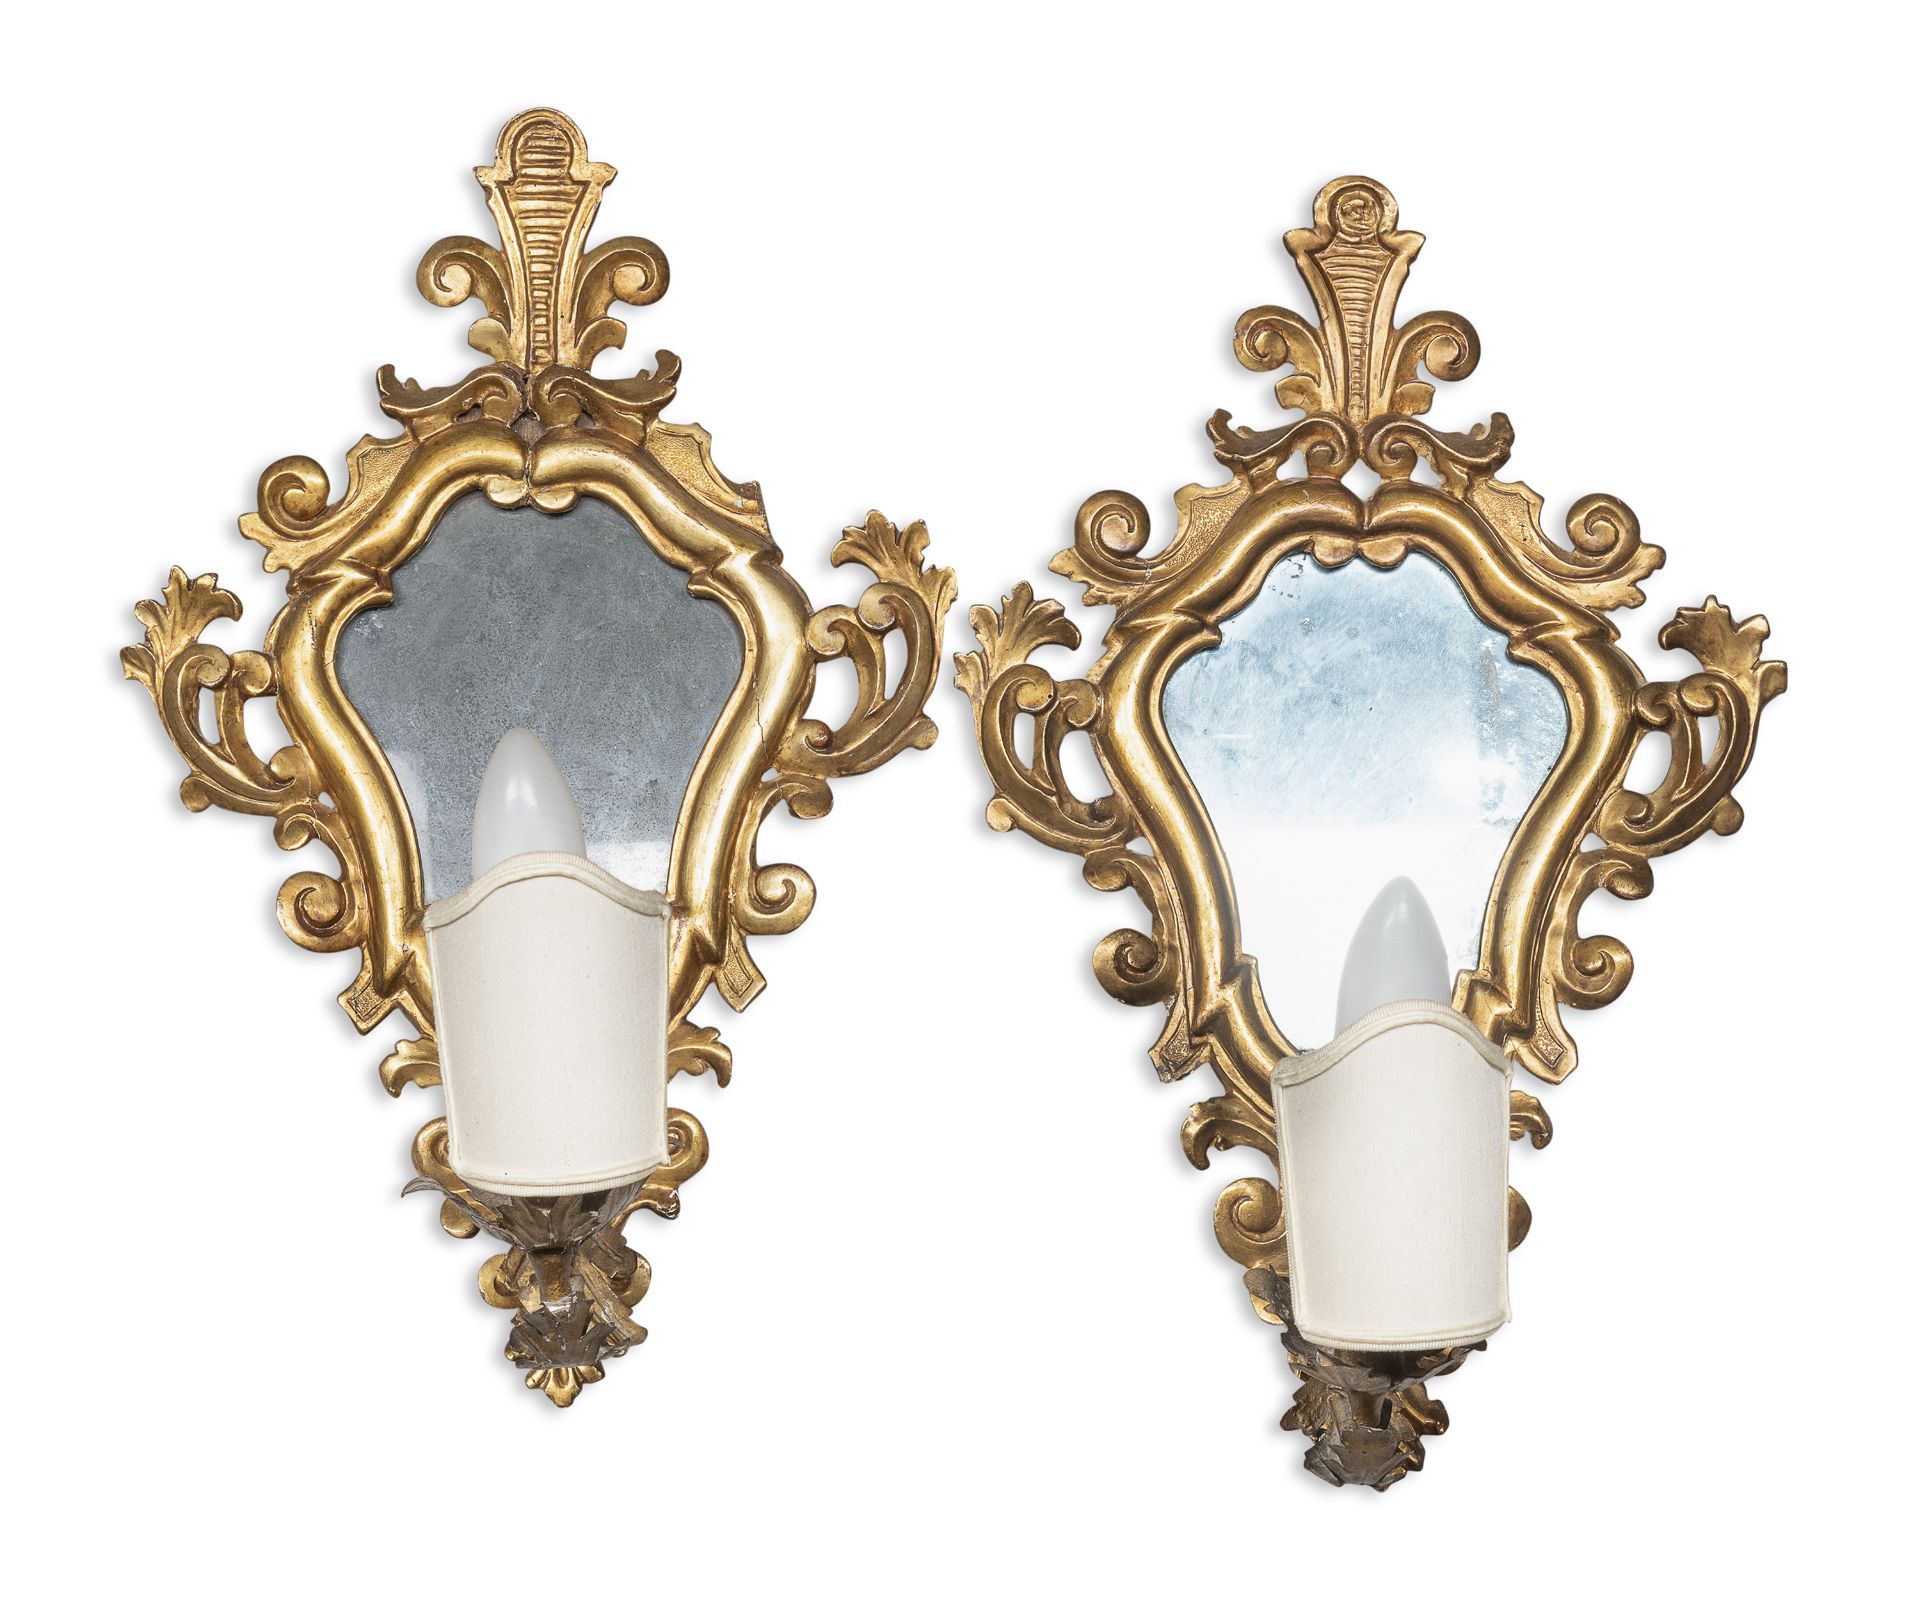 PAIR OF GILTWOOD MIRRORS END OF THE 18TH CENTURY